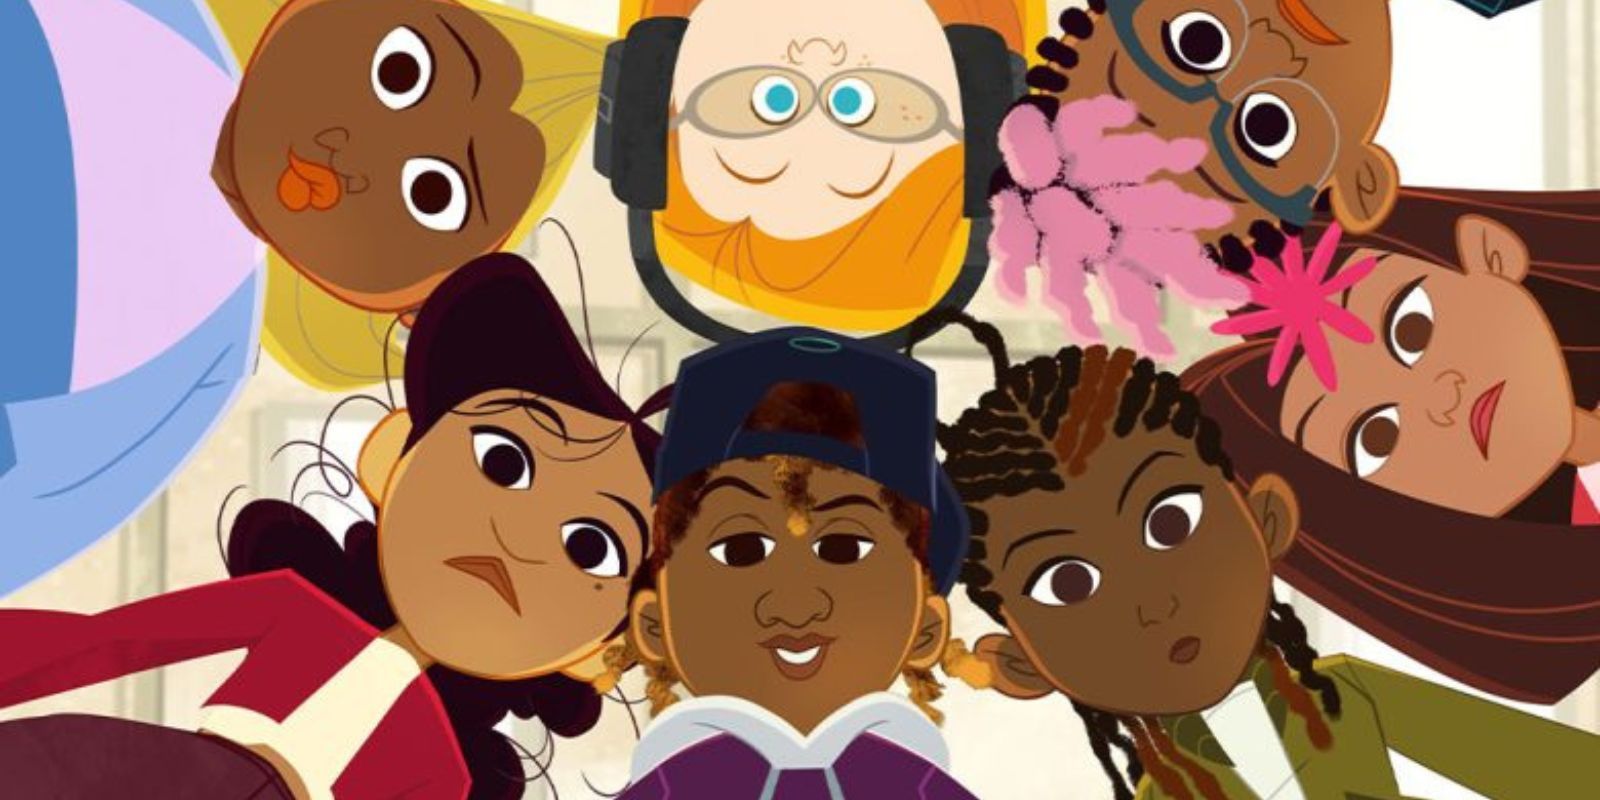 Penny with friends in a huddle in The Proud Family